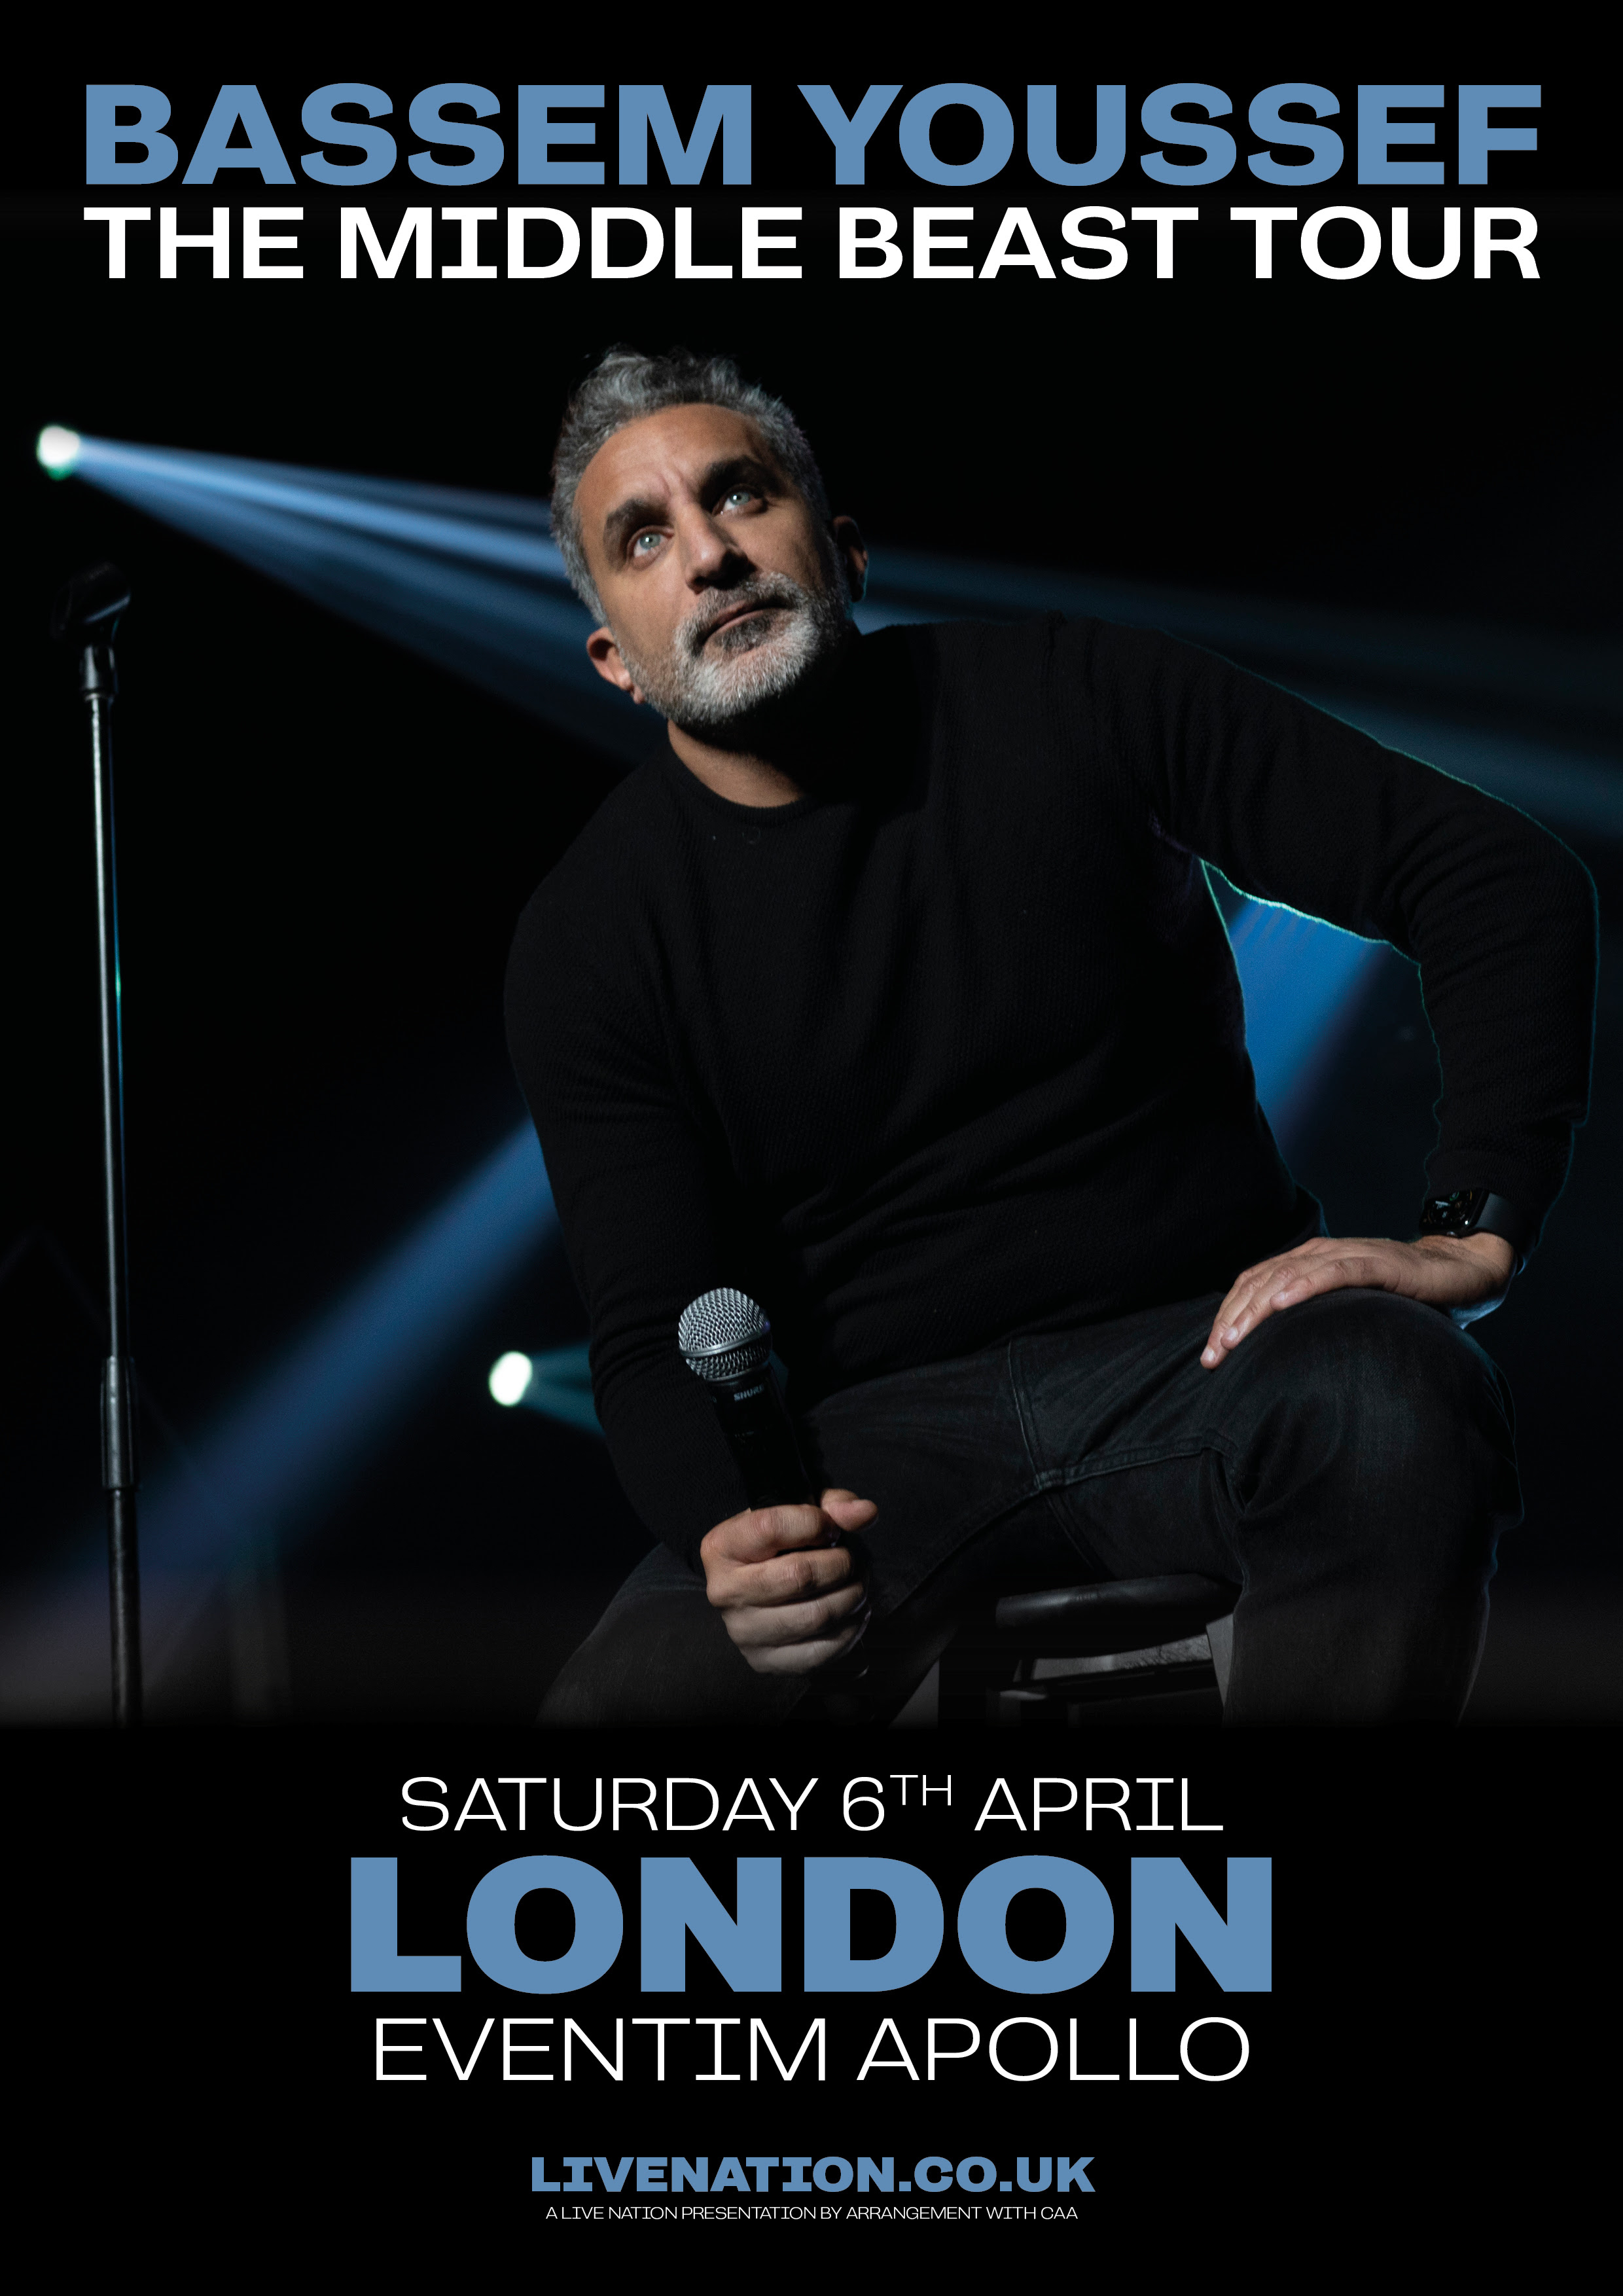 BASSEM YOUSSEF RETURNS TO THE UK IN 2024 FOR ‘THE MIDDLE BEAST’ TOUR AT